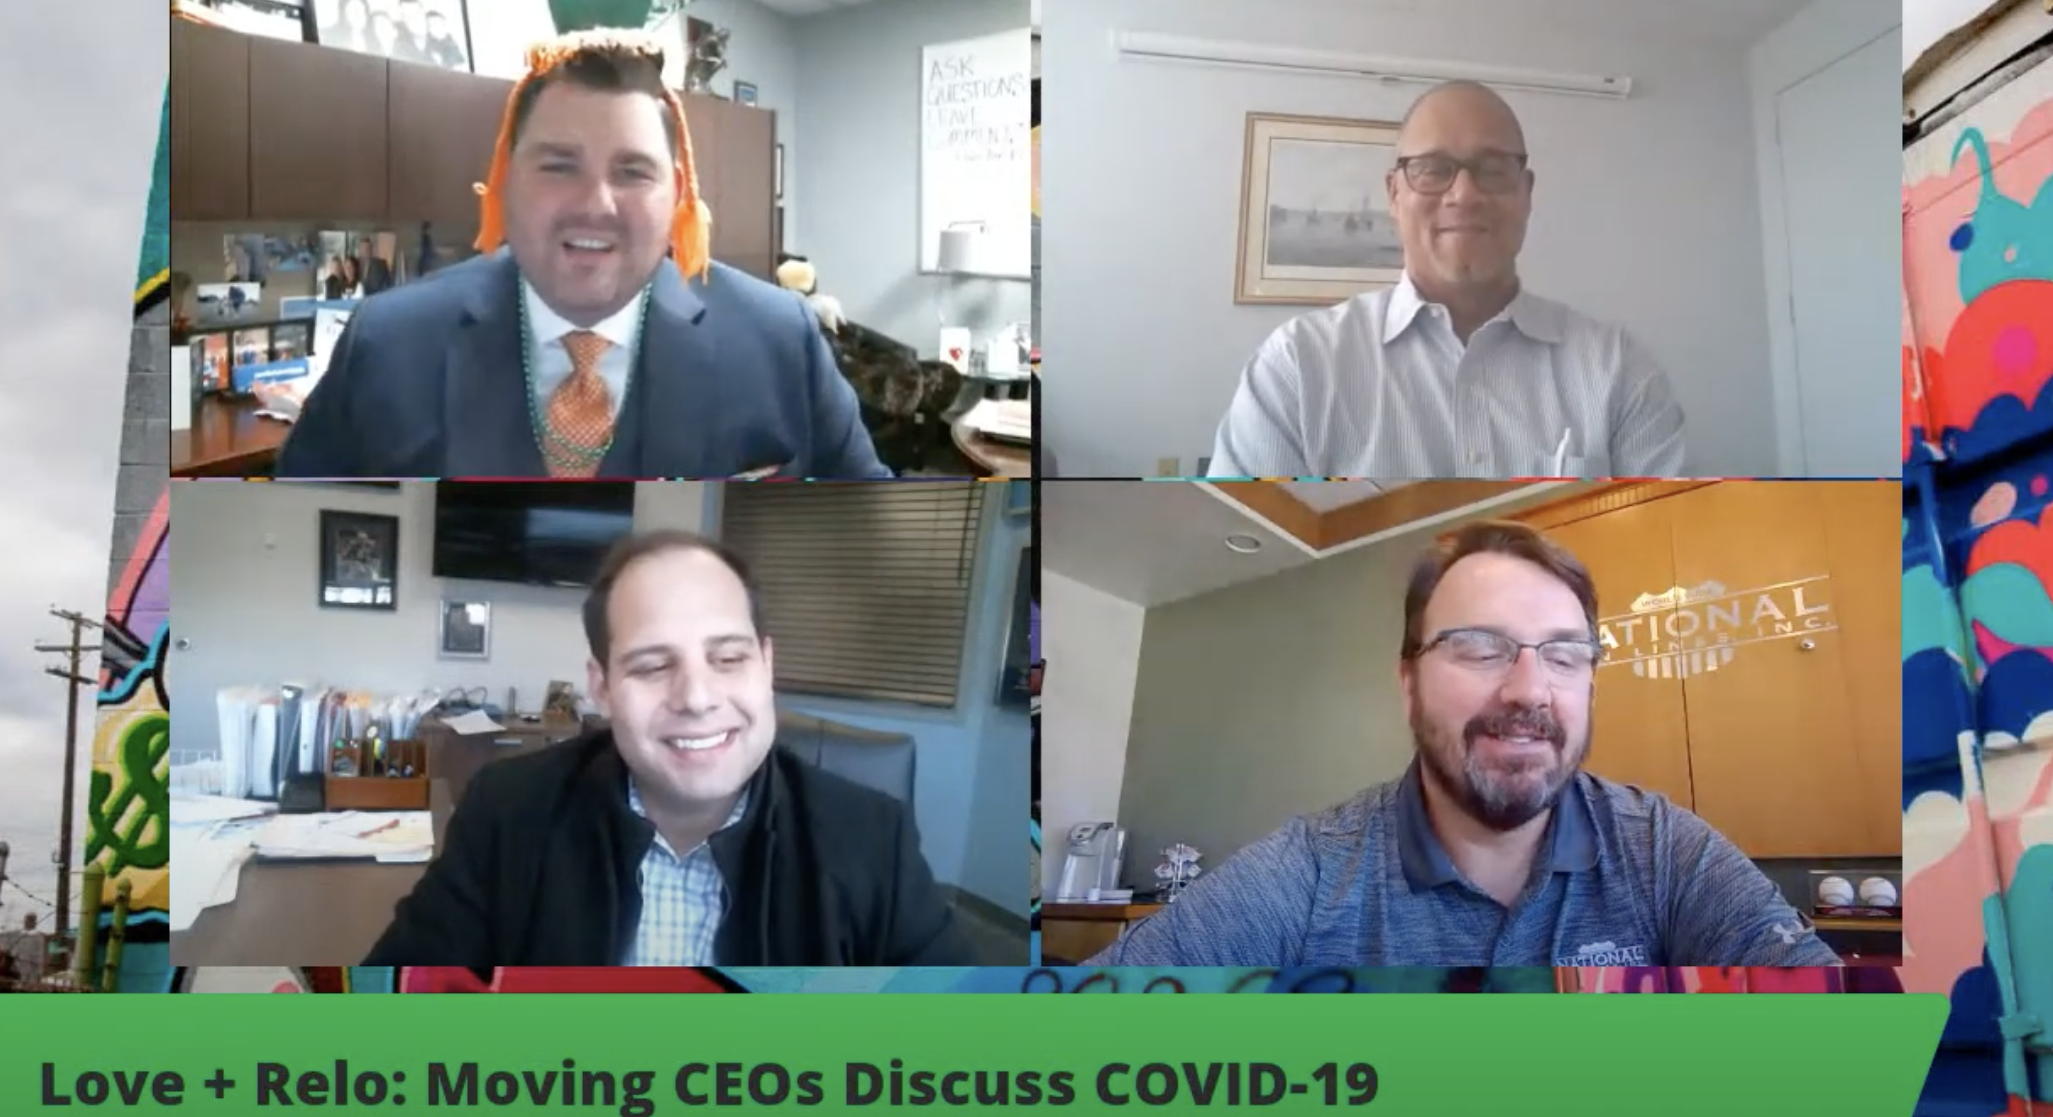 Love + Relo: Moving Industry CEOs Discuss COVID-19